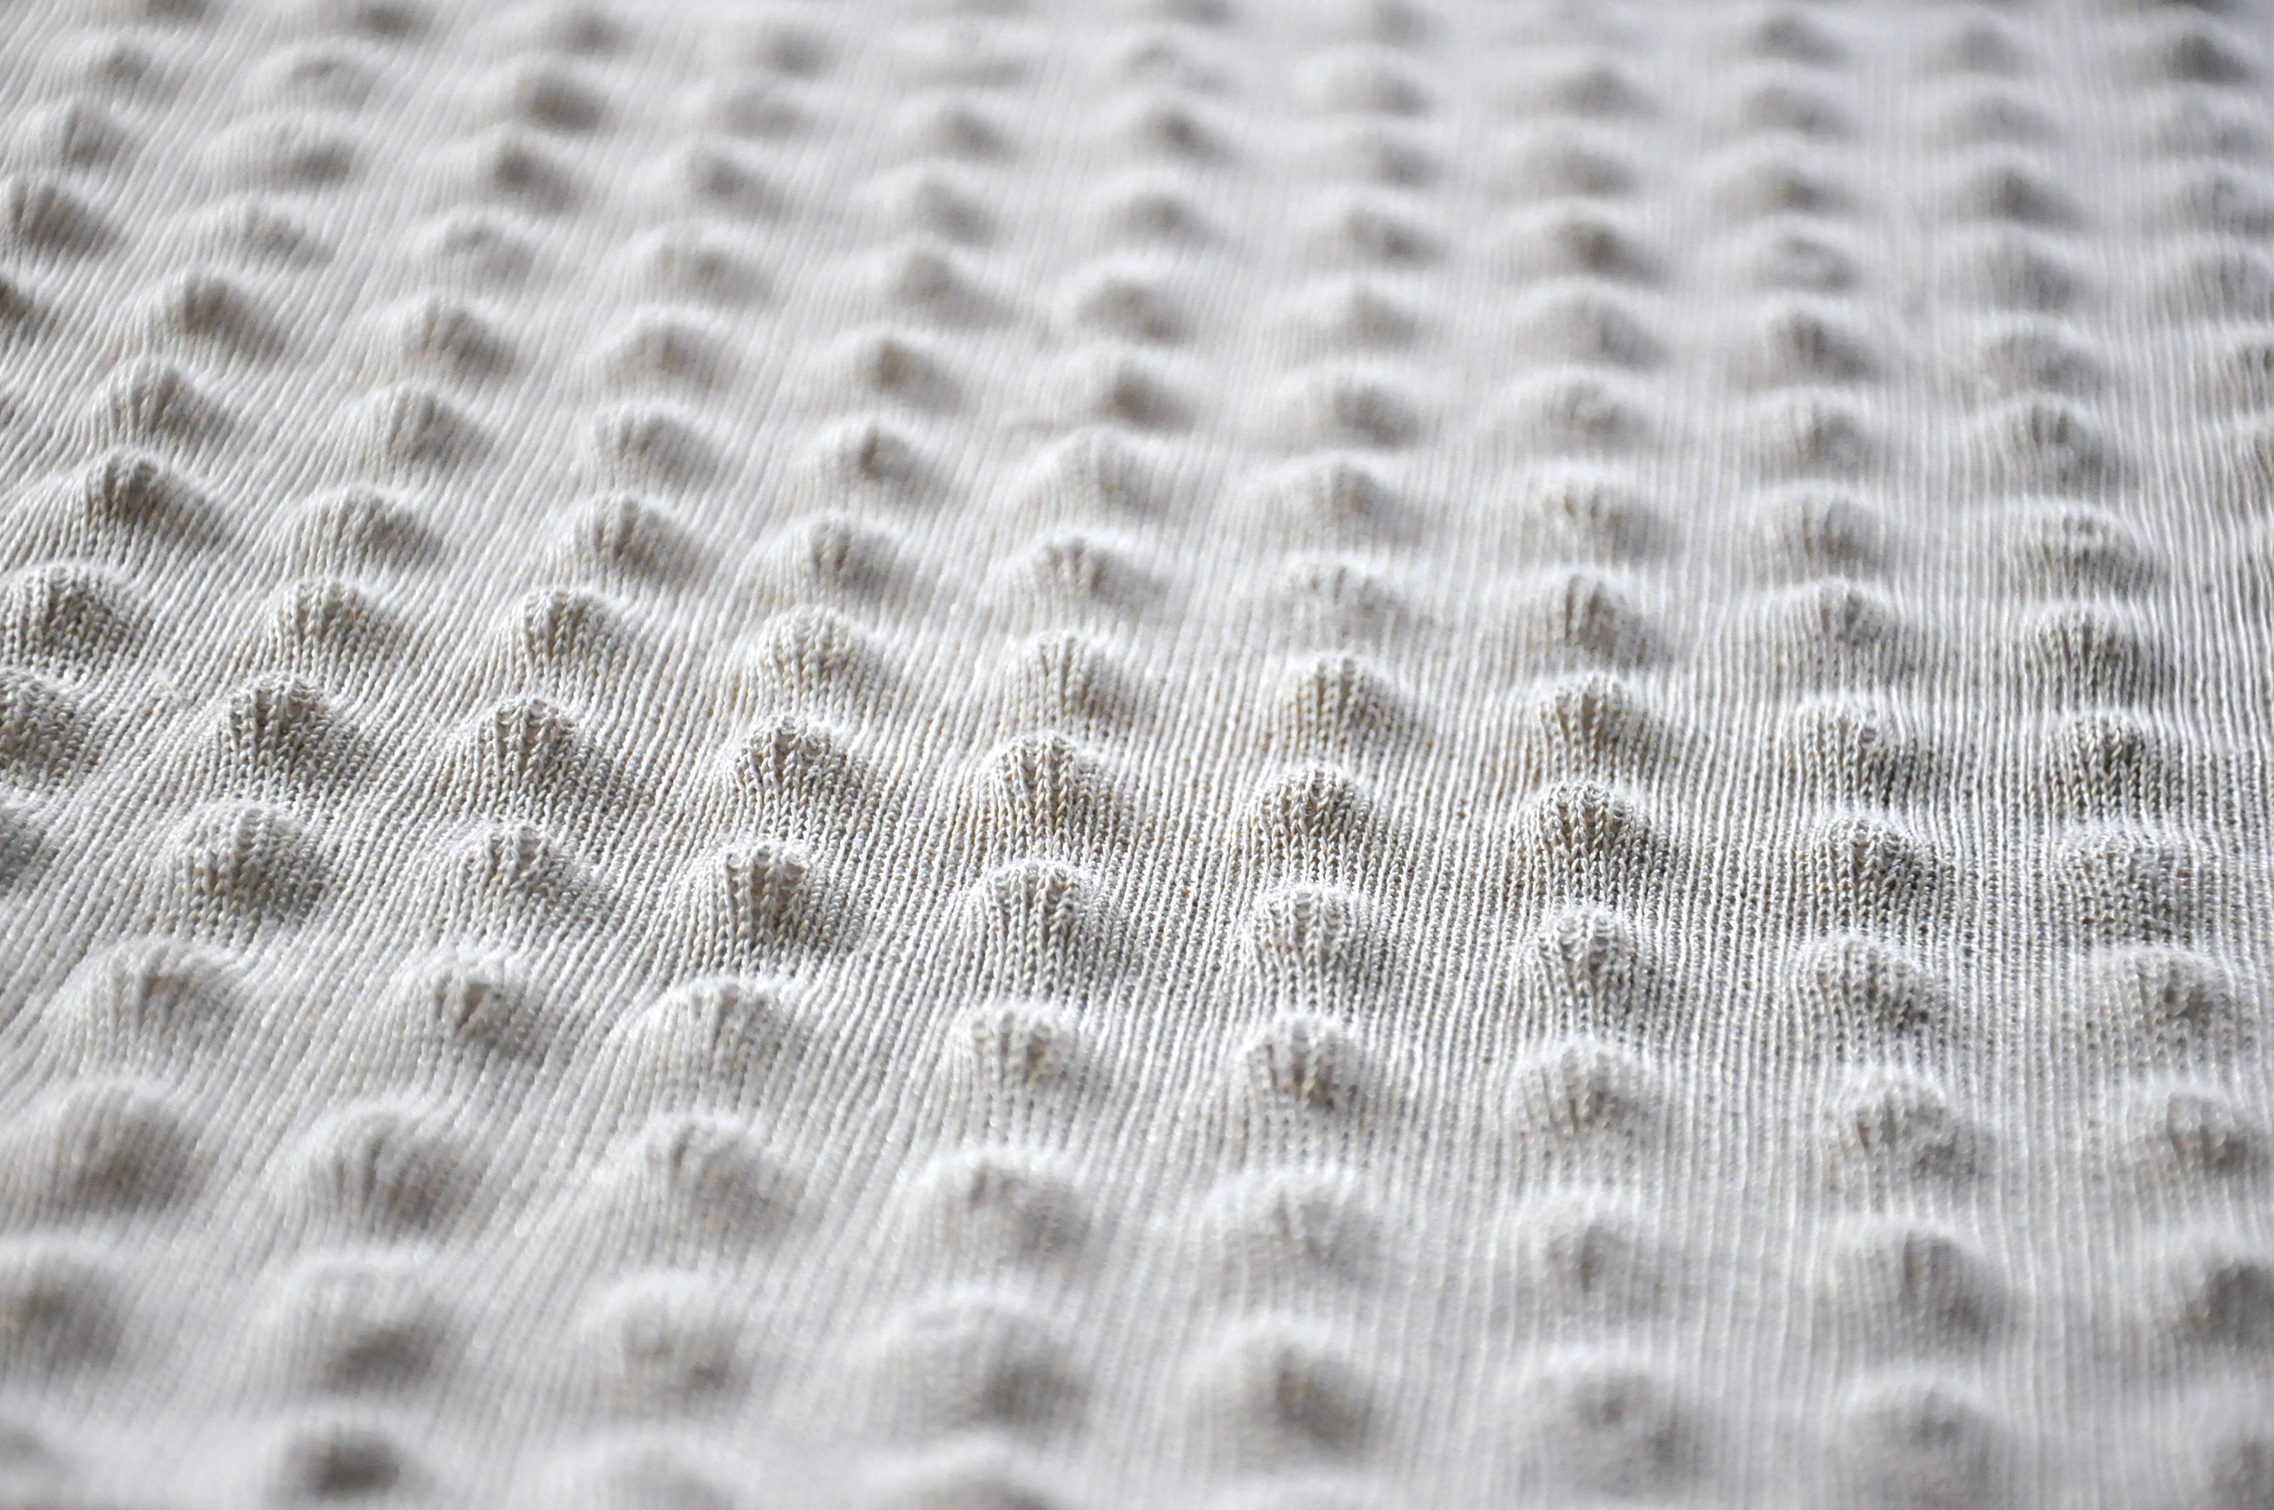   Canvas  (2011)  Textile Light in collaboration with  IZM Fraunhofer Institute , Berlin 